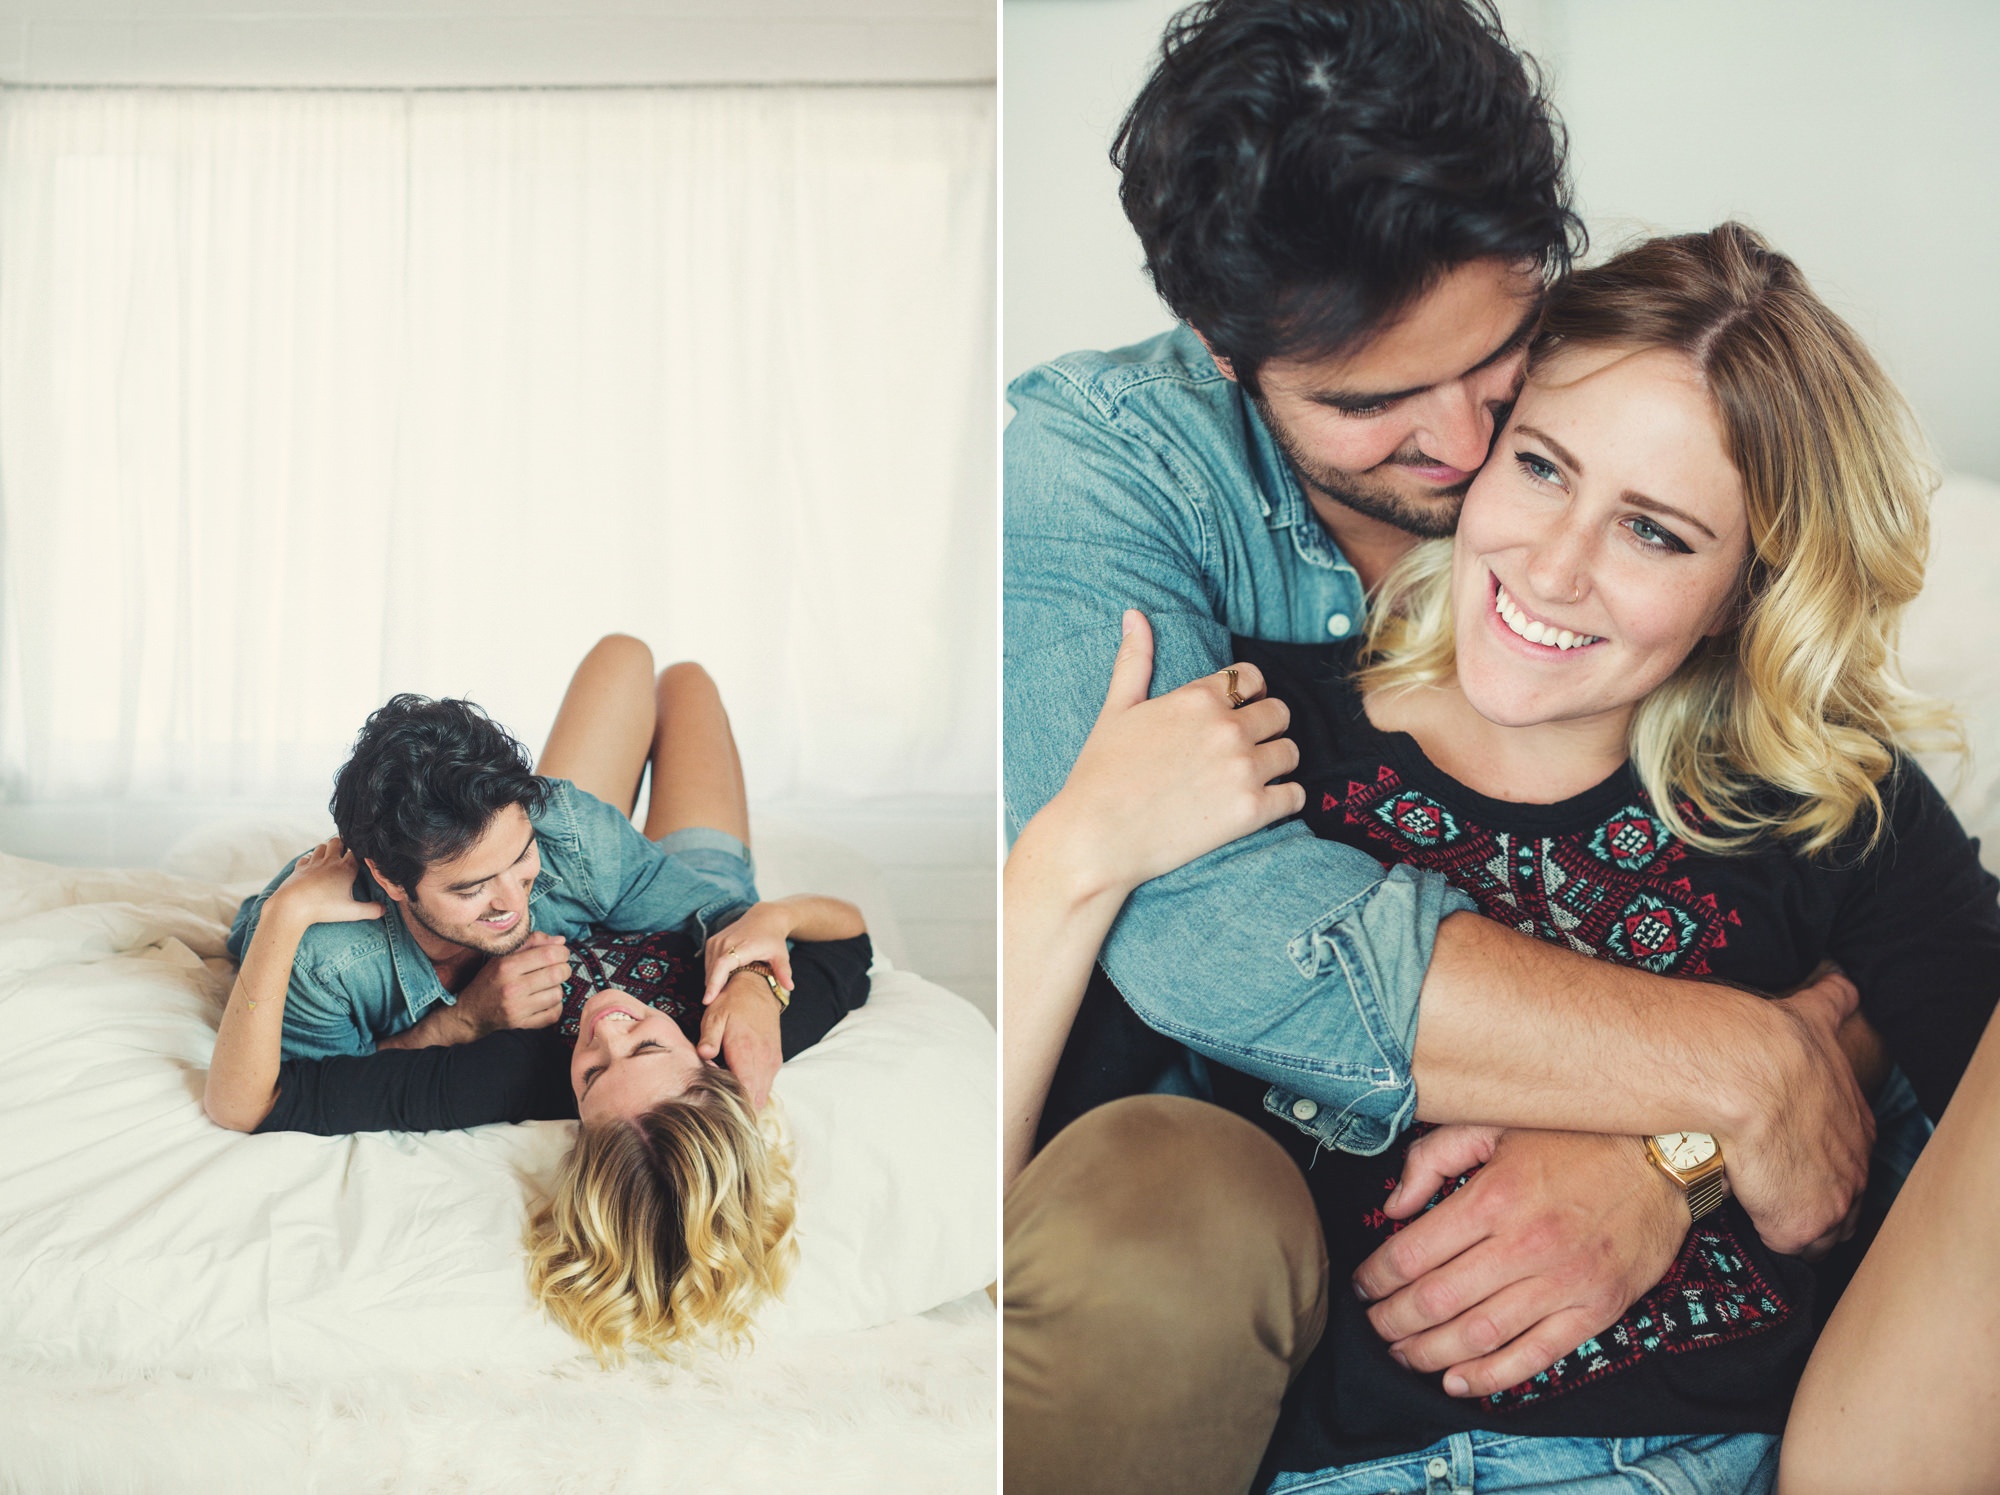 Couple Young Beautiful Cute Lovers in Love. Portrait of Intimate Passionate  Sensual People Stock Image - Image of adult, embrace: 214063187